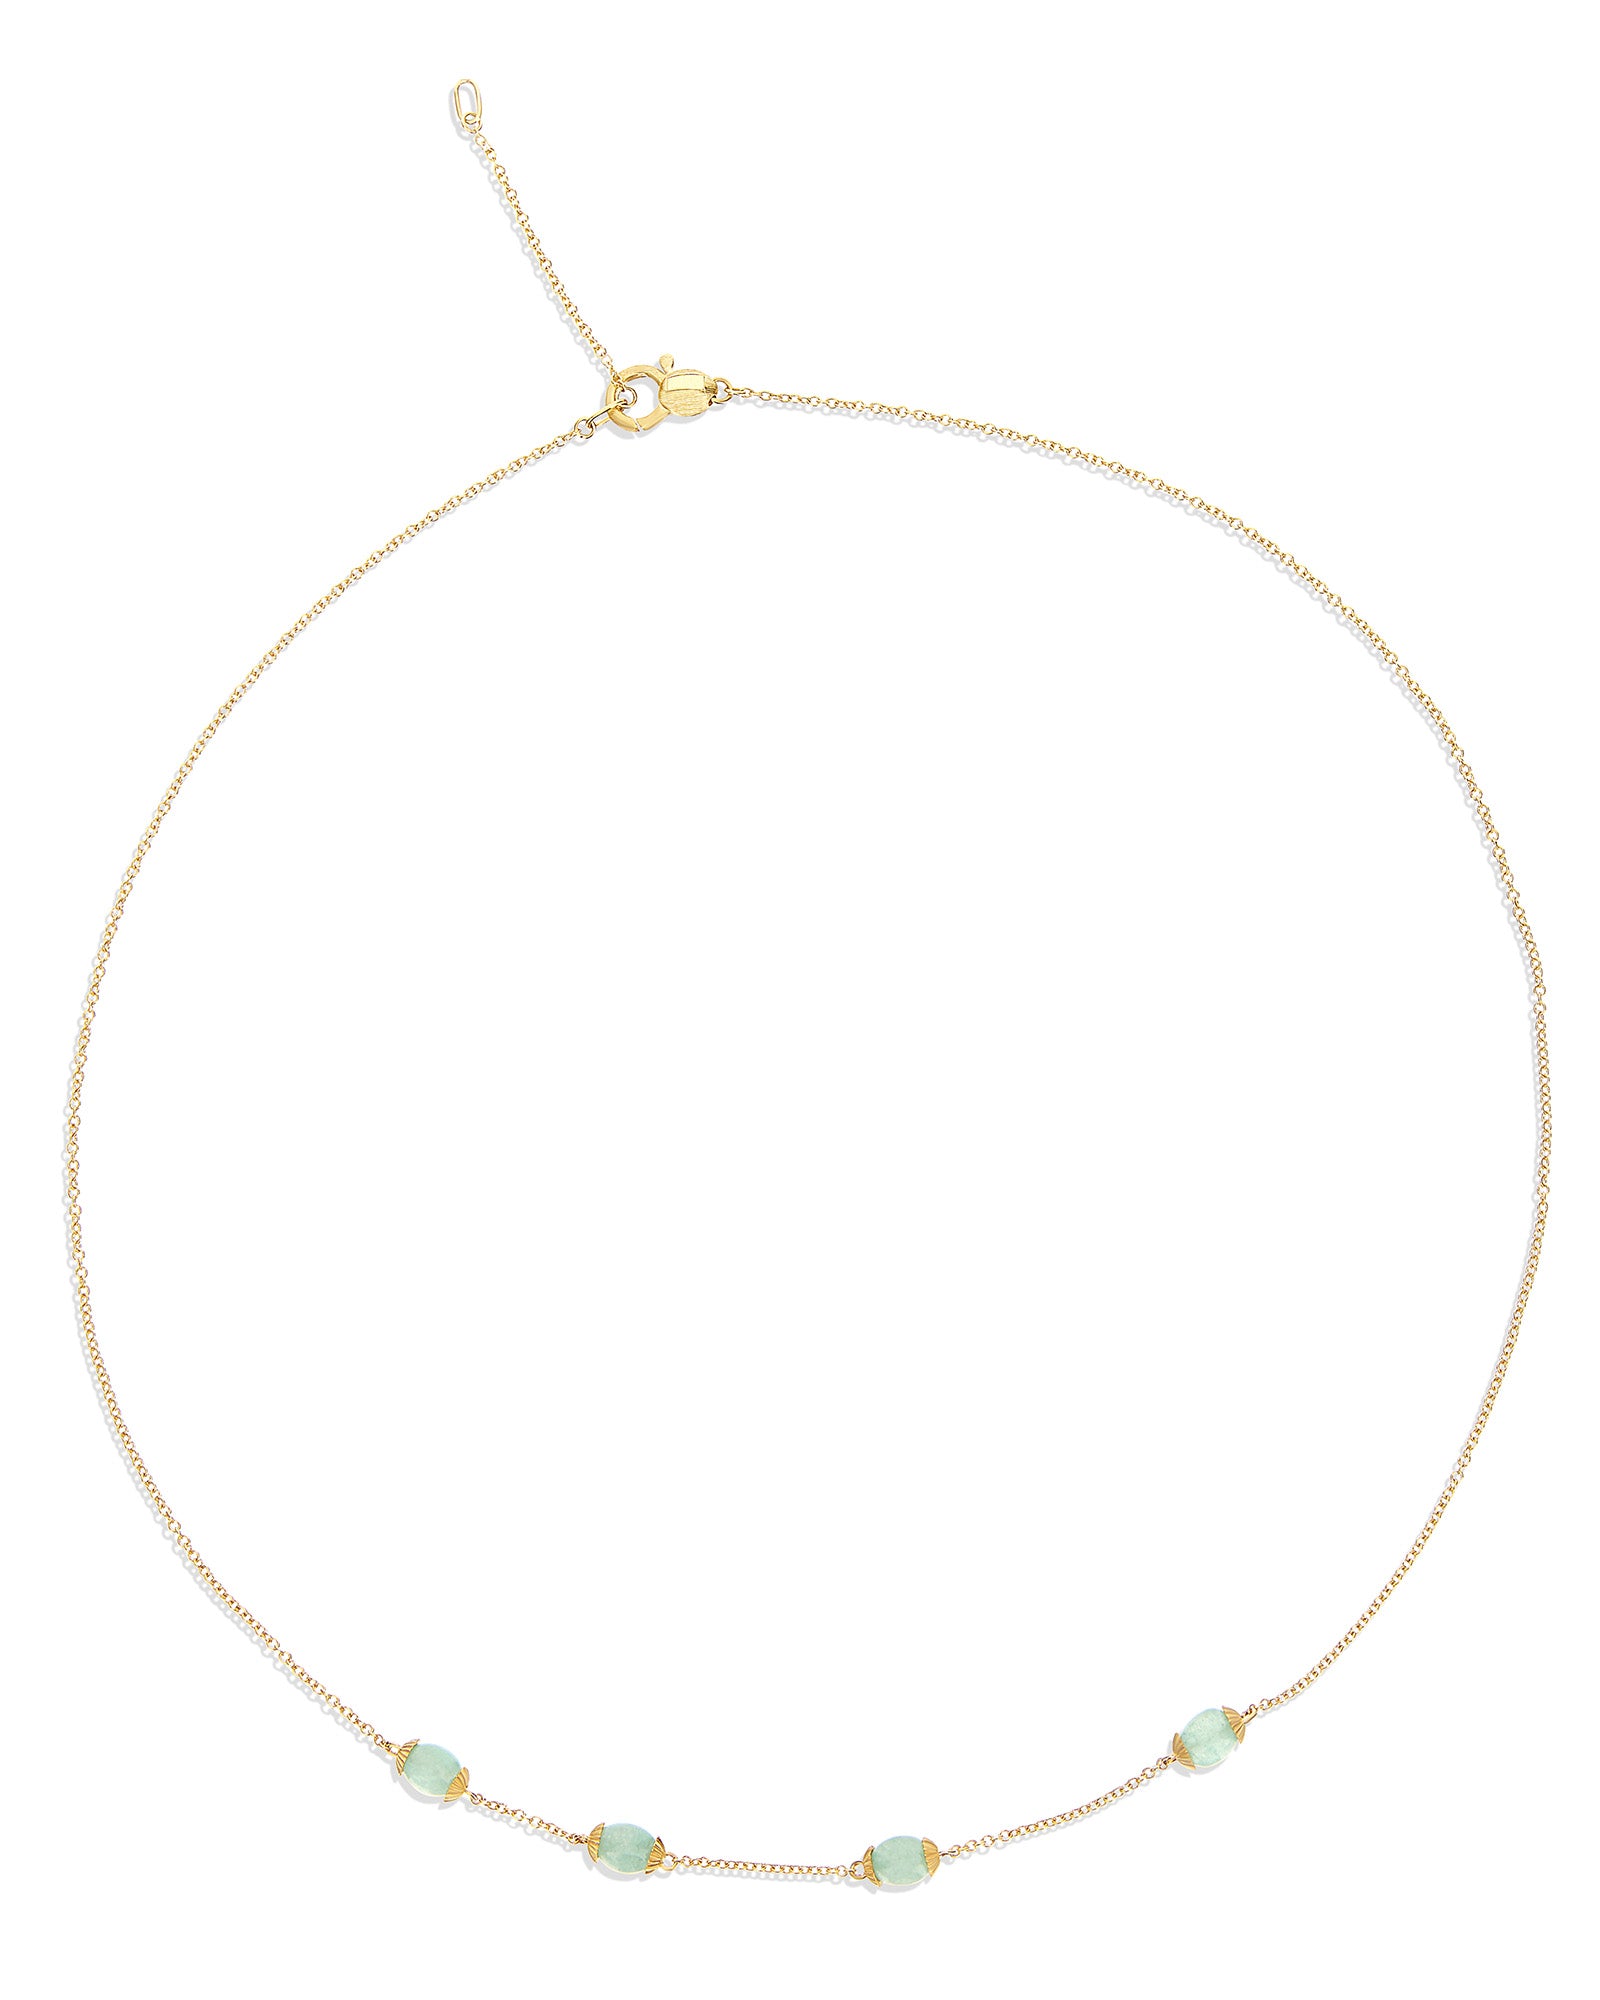 "amazonia" gold and green aventurine necklace